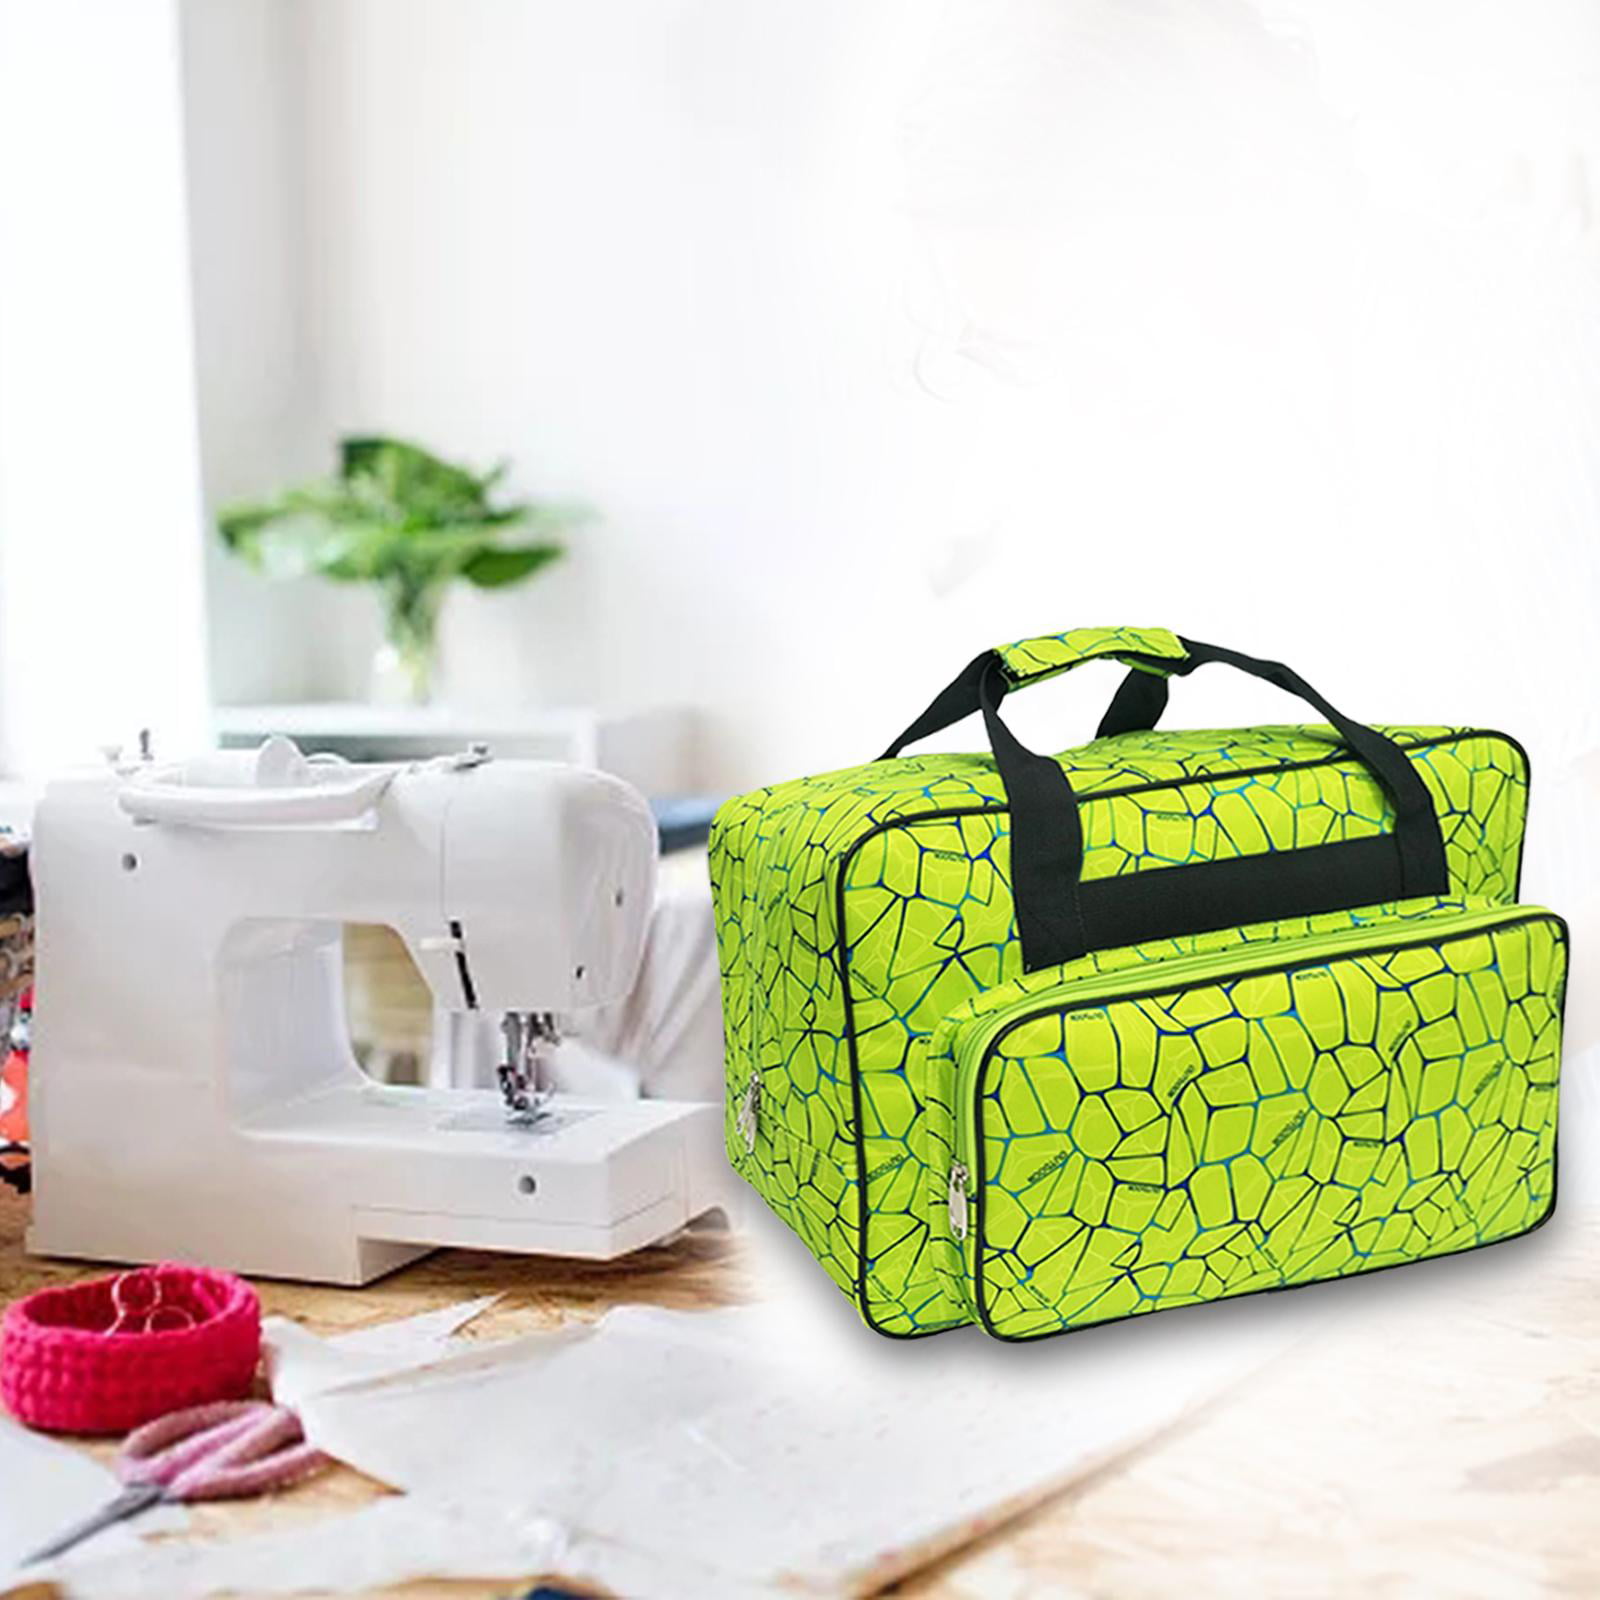 Portable Sewing Machine Carrying Case - arts & crafts - by owner